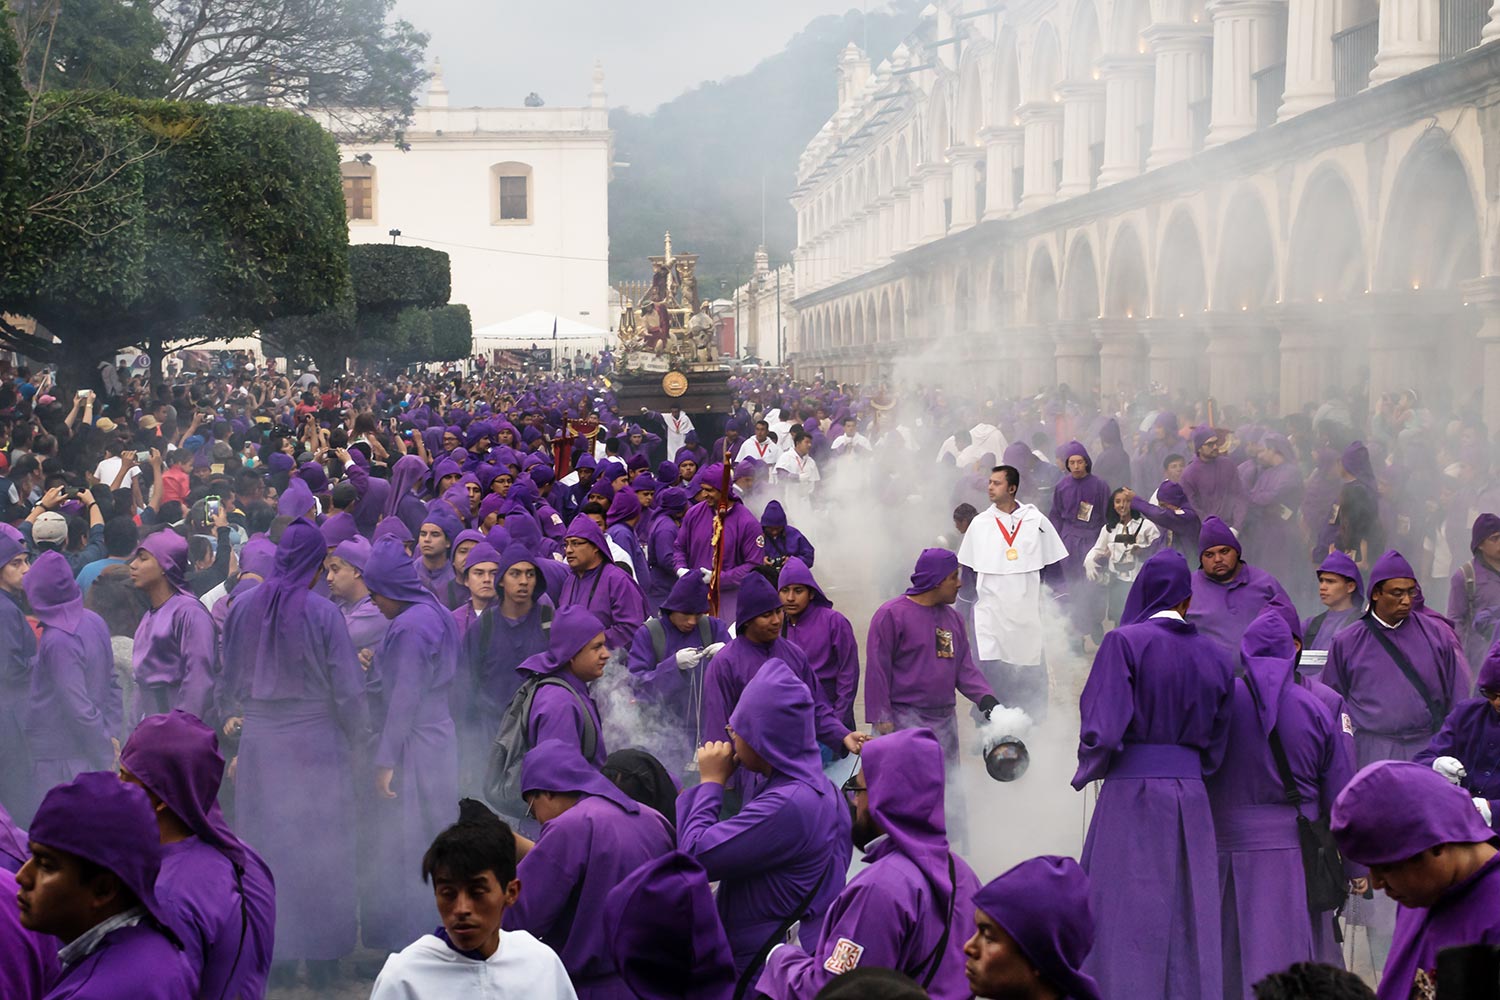 Priest in incense smoke in front of float at the procession San Bartolome de Becerra at the Plaza Mayor